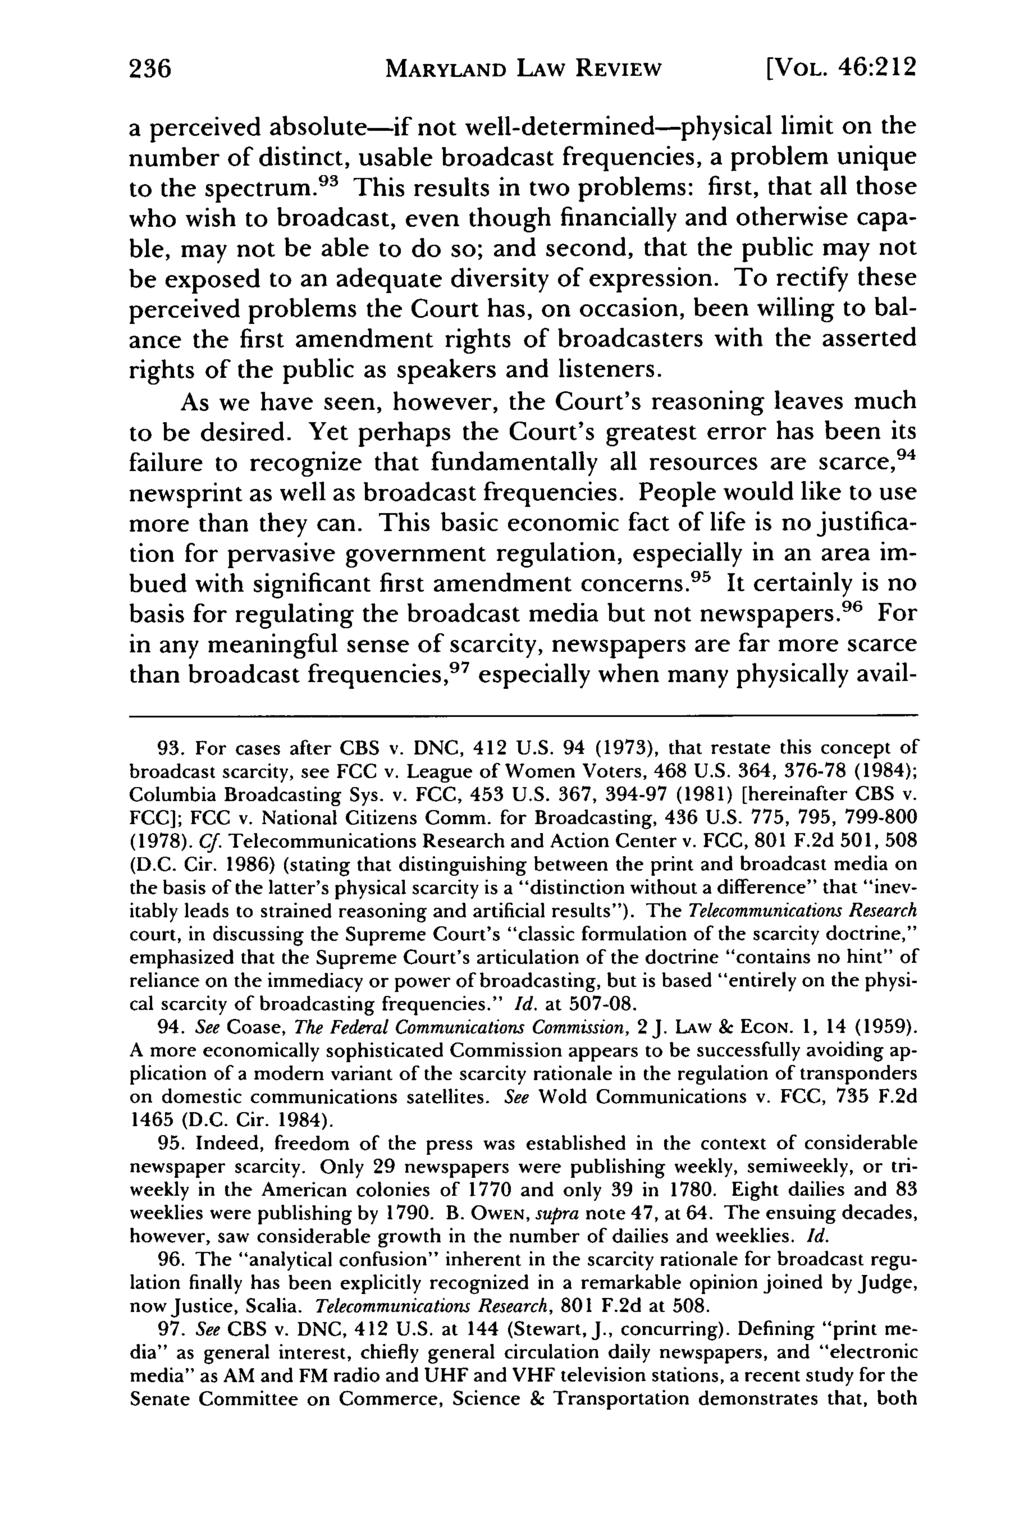 236 MARYLAND LAW REVIEW [VOL. 46:212 a perceived absolute-if not well-determined-physical limit on the number of distinct, usable broadcast frequencies, a problem unique to the spectrum.